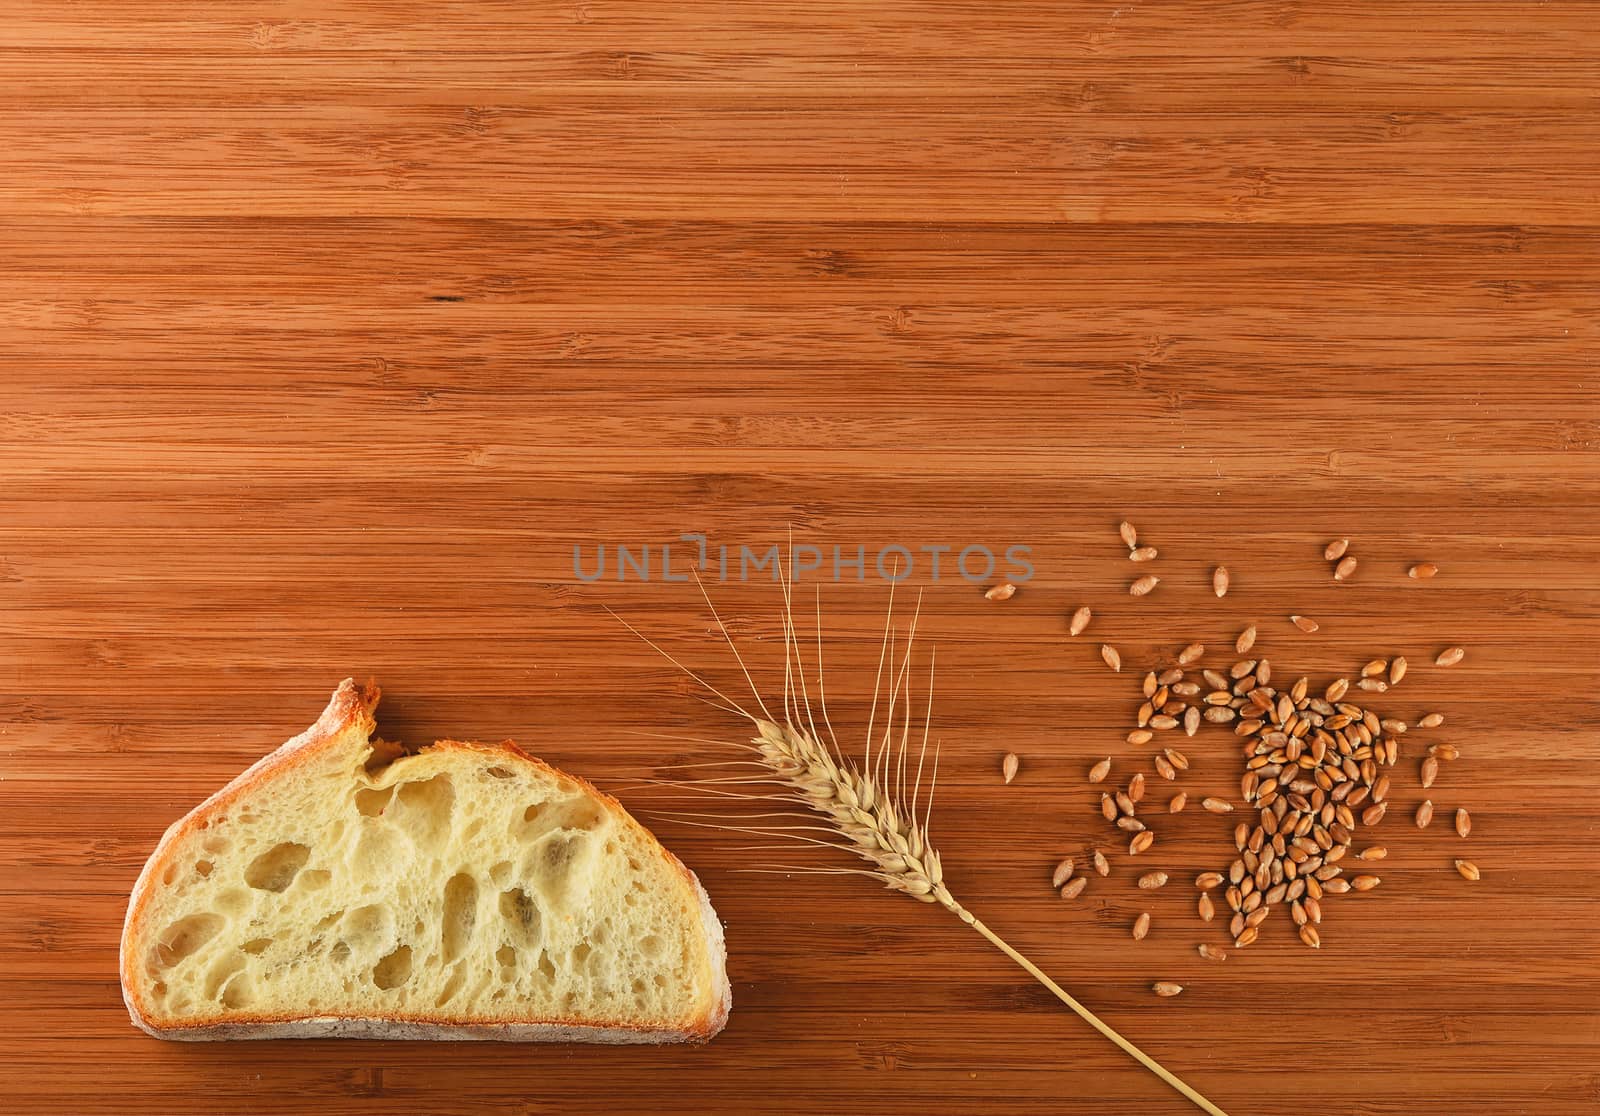 Wooden bamboo cutting board with one wheat ear, handful of ripe grains and a slice of bread - add your text